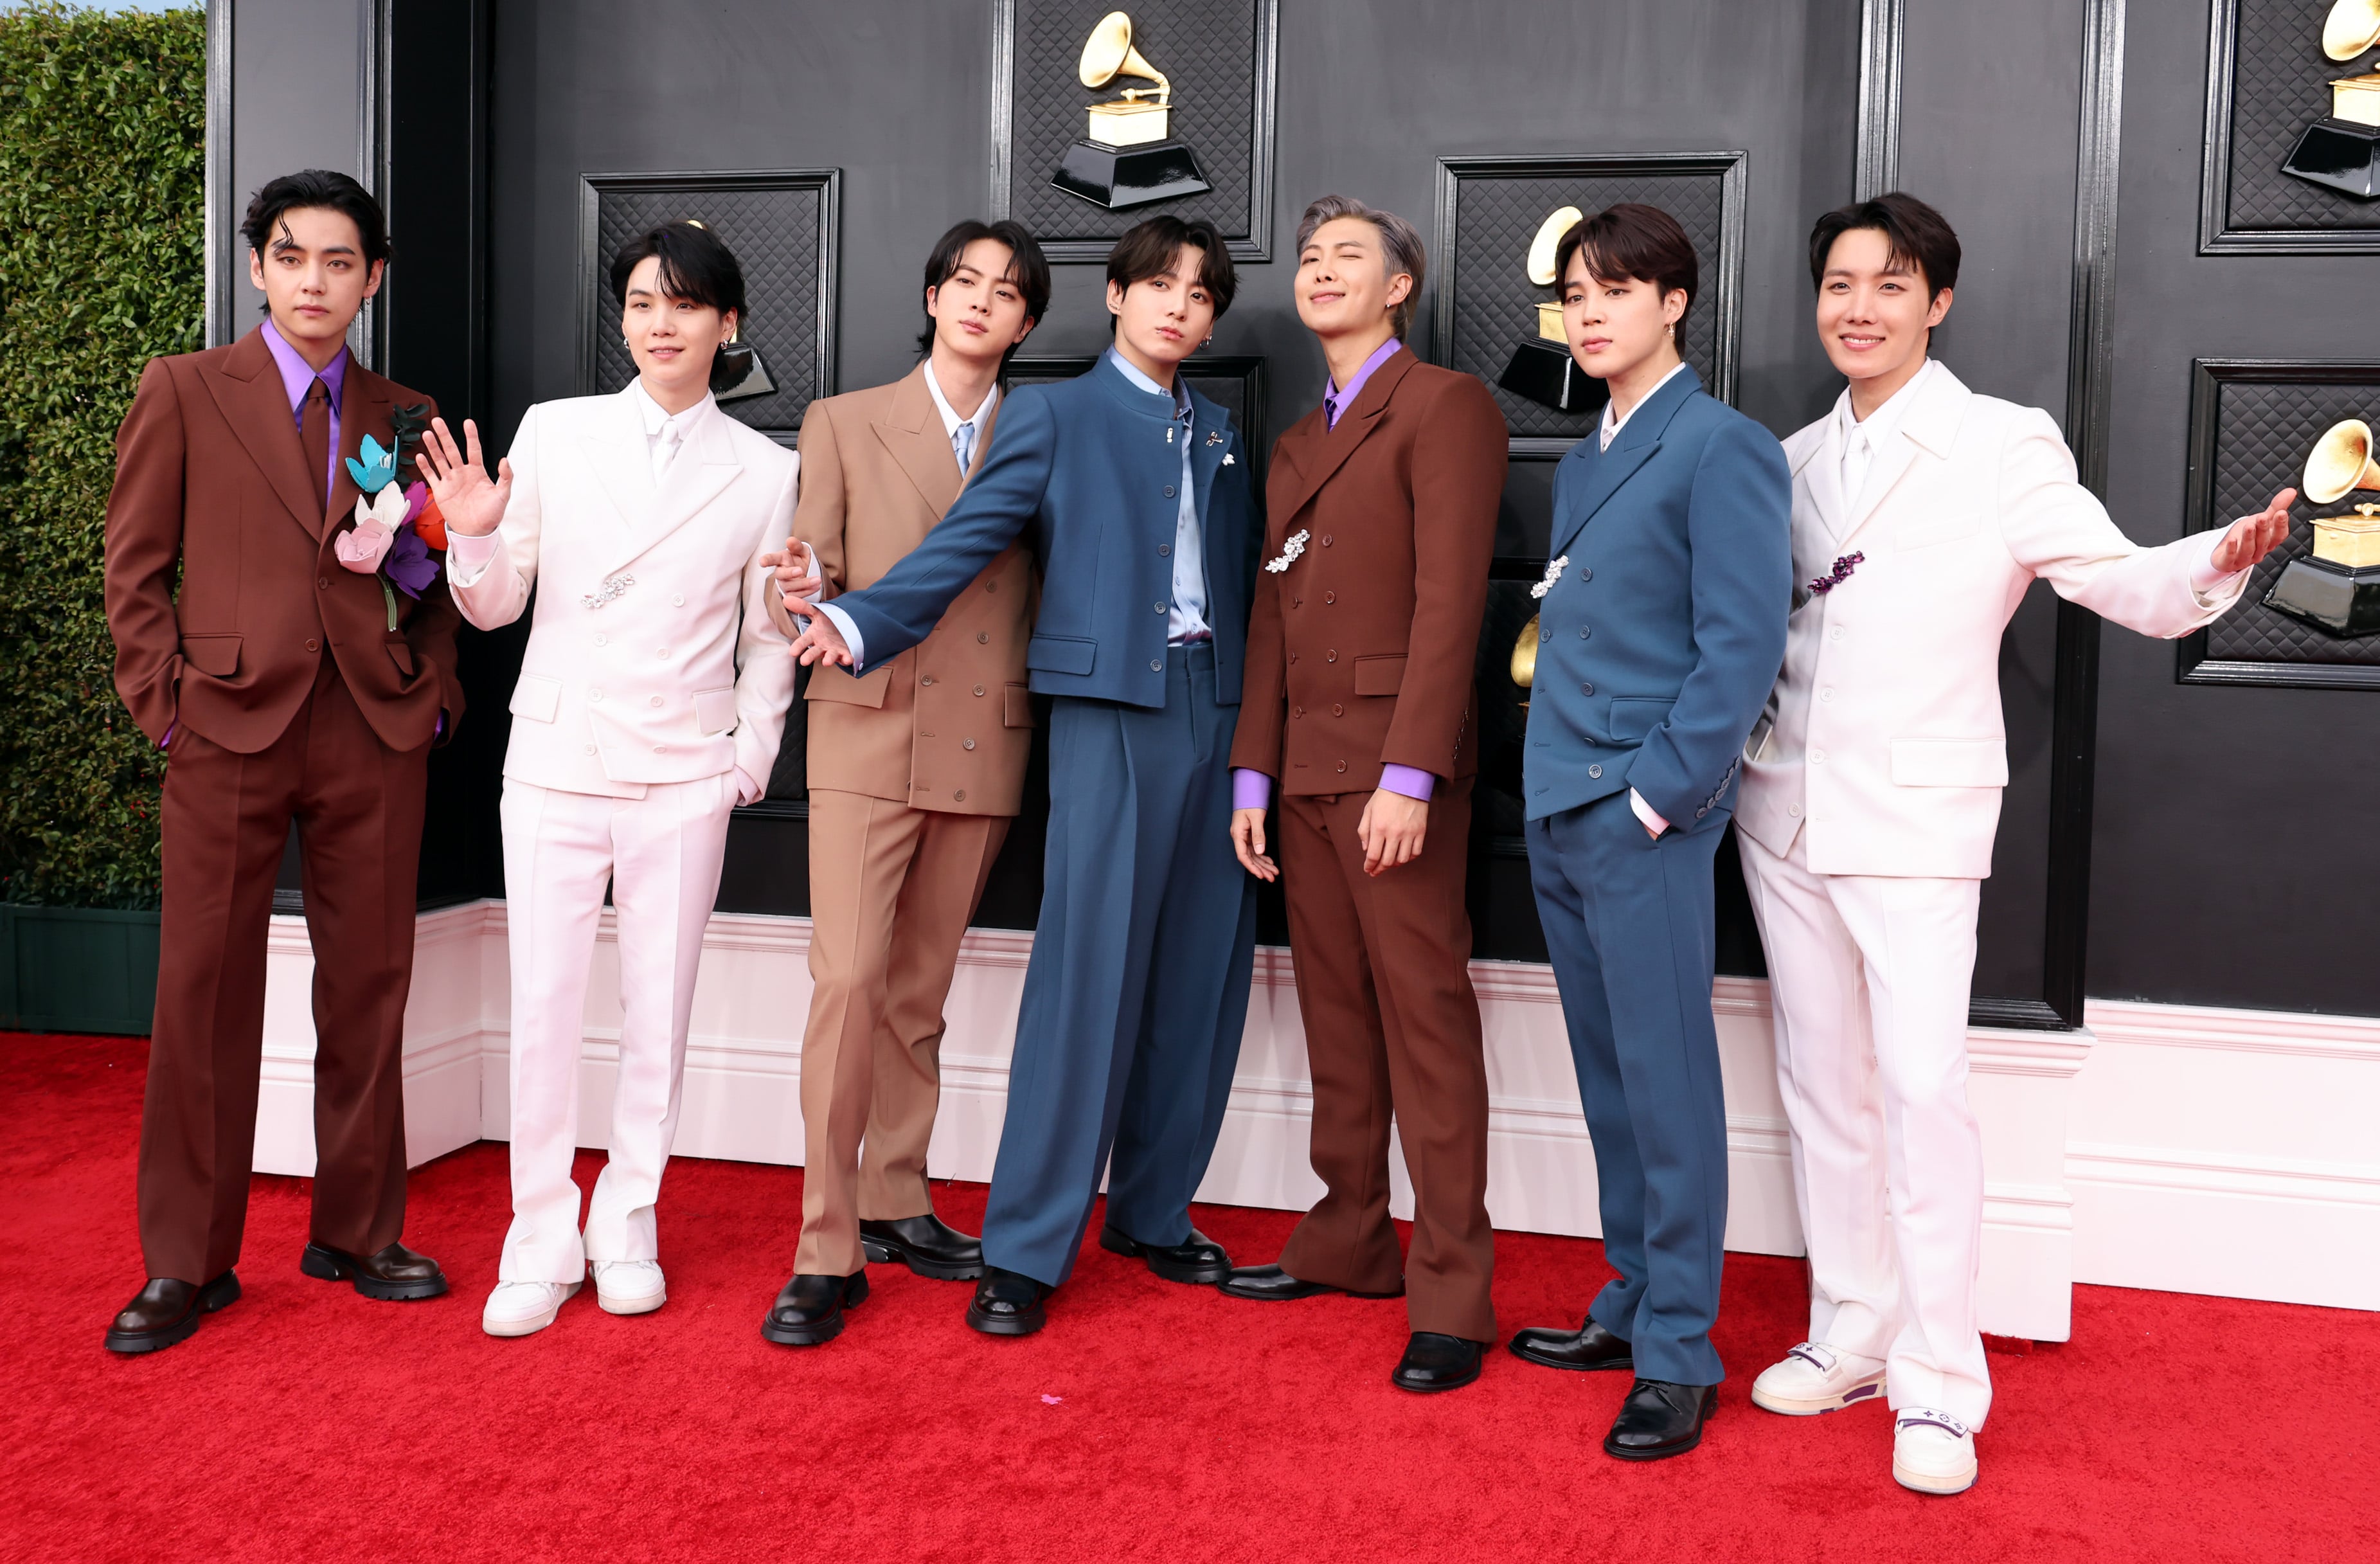 BTS Presents a Grammy, And Fans Lose It on Twitter